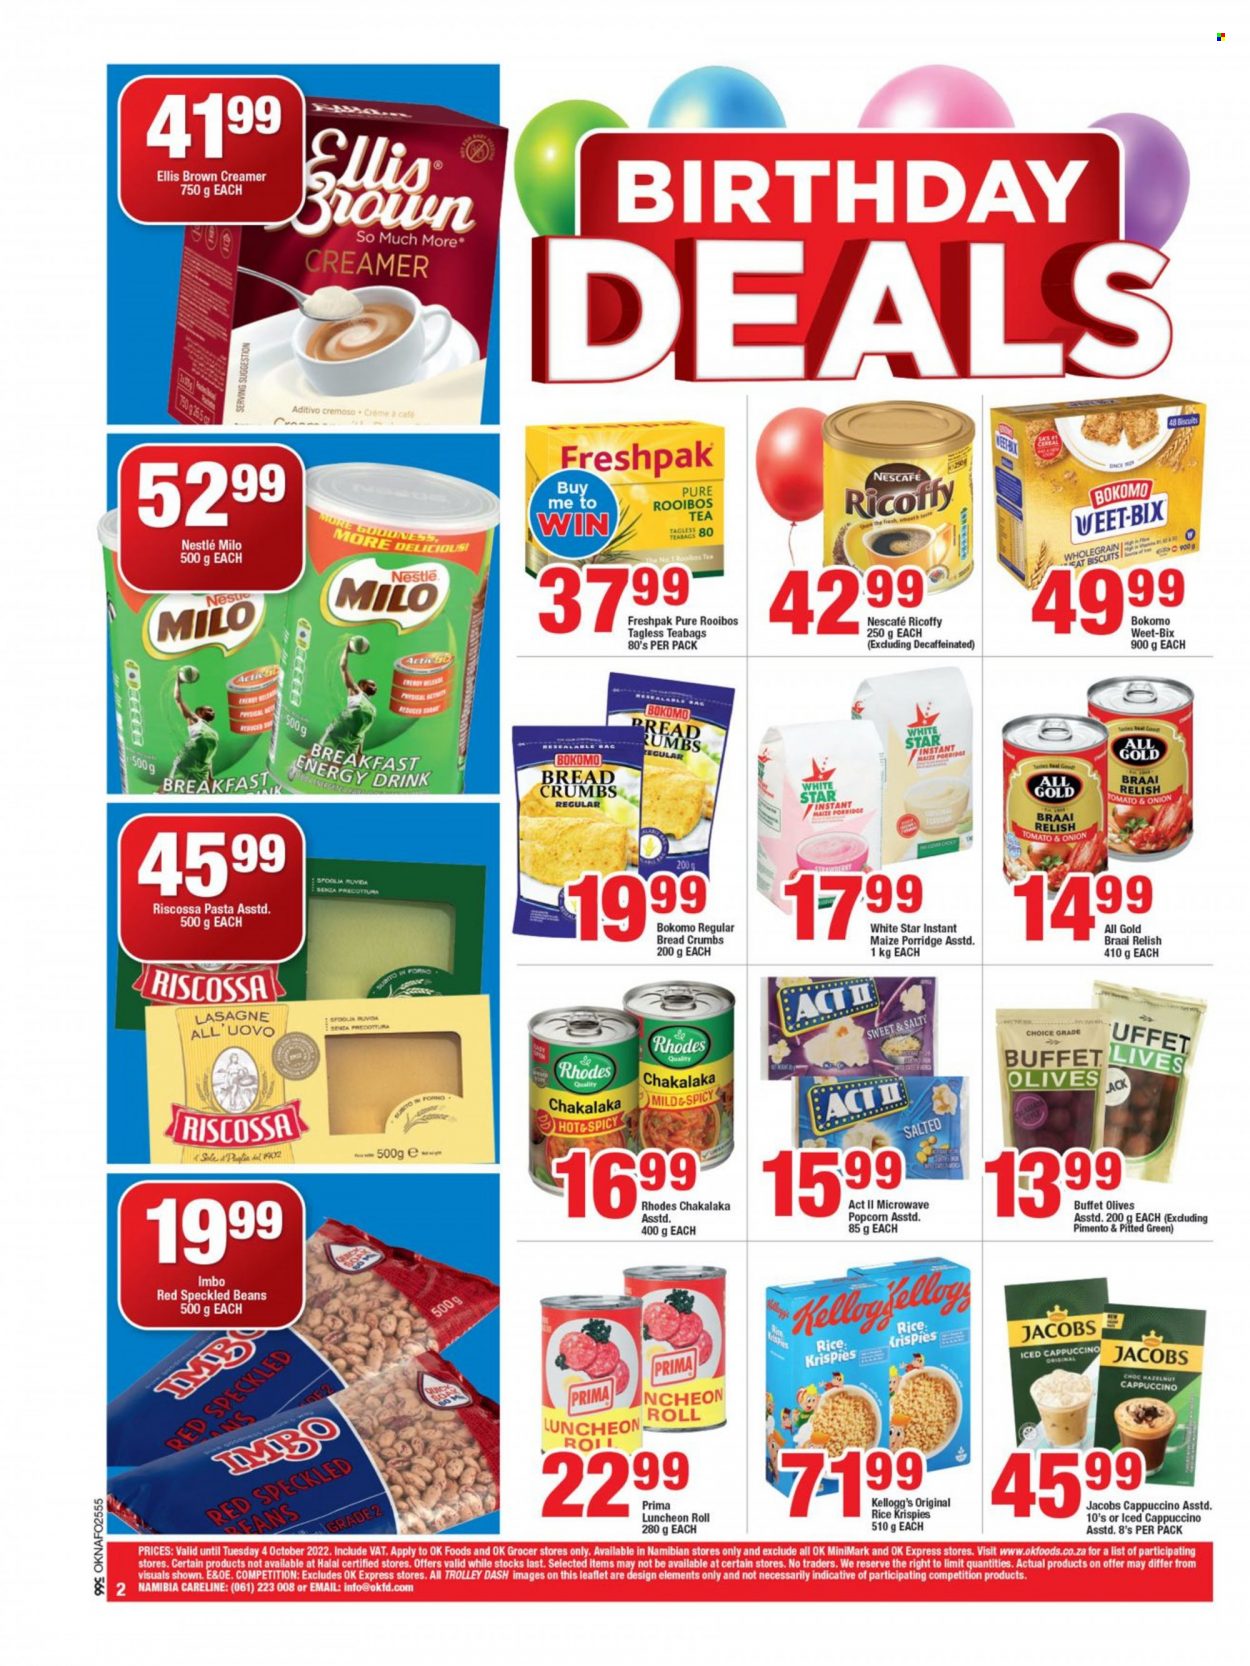 OK catalogue  - 29/09/2022 - 04/10/2022 - Sales products - breadcrumbs, beans, pasta, chakalaka, lunch meat, Milo, Ellis Brown, creamer, Nestlé, cereal bar, Kellogg's, biscuit, popcorn, White Star, red beans, olives, Weet-Bix, porridge, Rice Krispies, energy drink, tea, tea bags, rooibos tea, cappuccino, Jacobs, Ricoffy, Nescafé. Page 2.